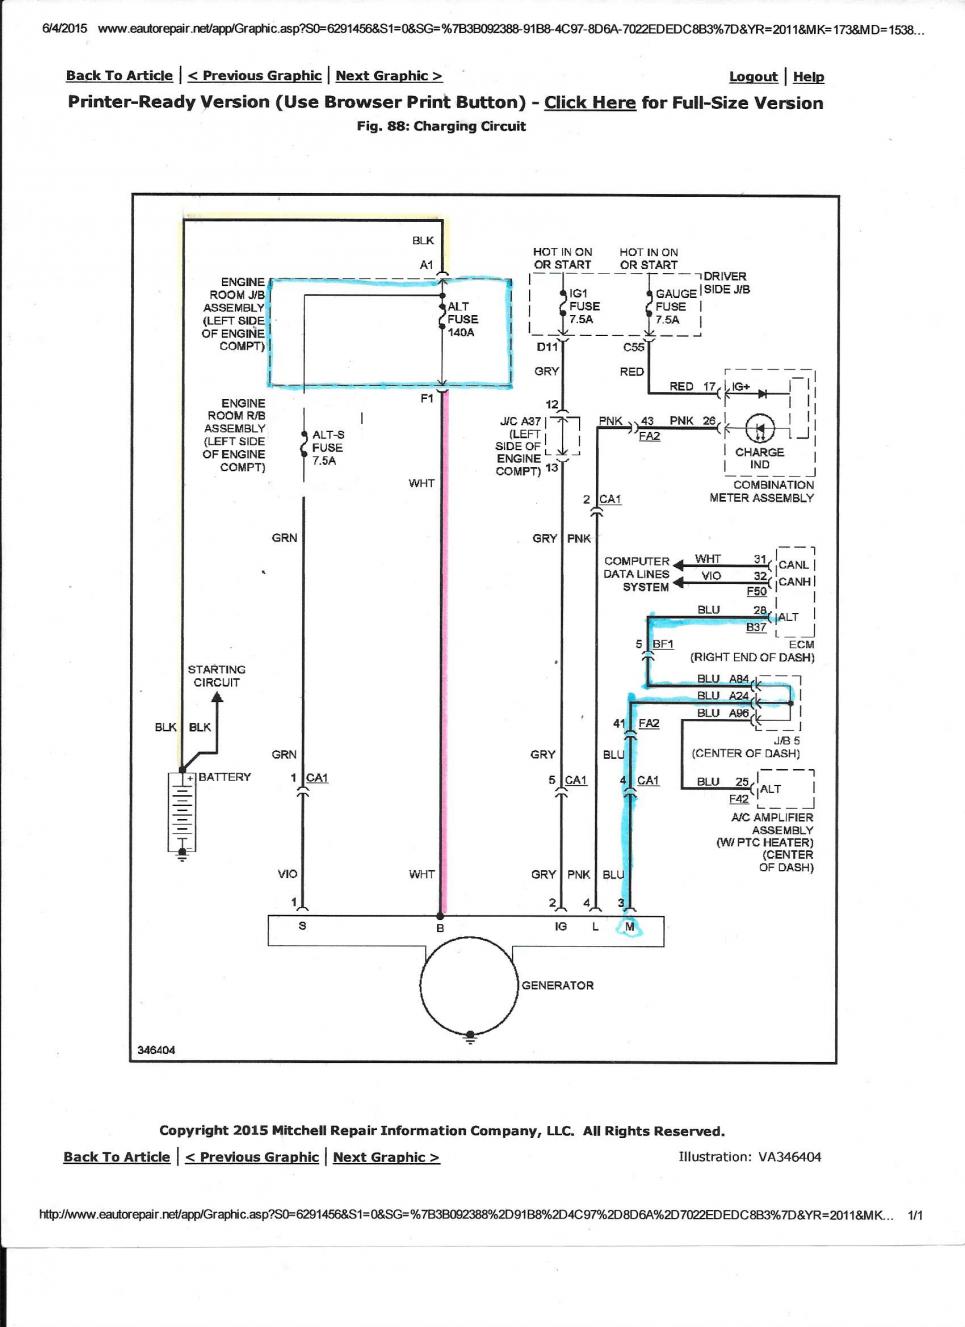 Electrical Gremlins Reverse Polarity - 5 Hours into Fix - Struggling with Next Steps-4runner-starting-charging-diagram-jpg